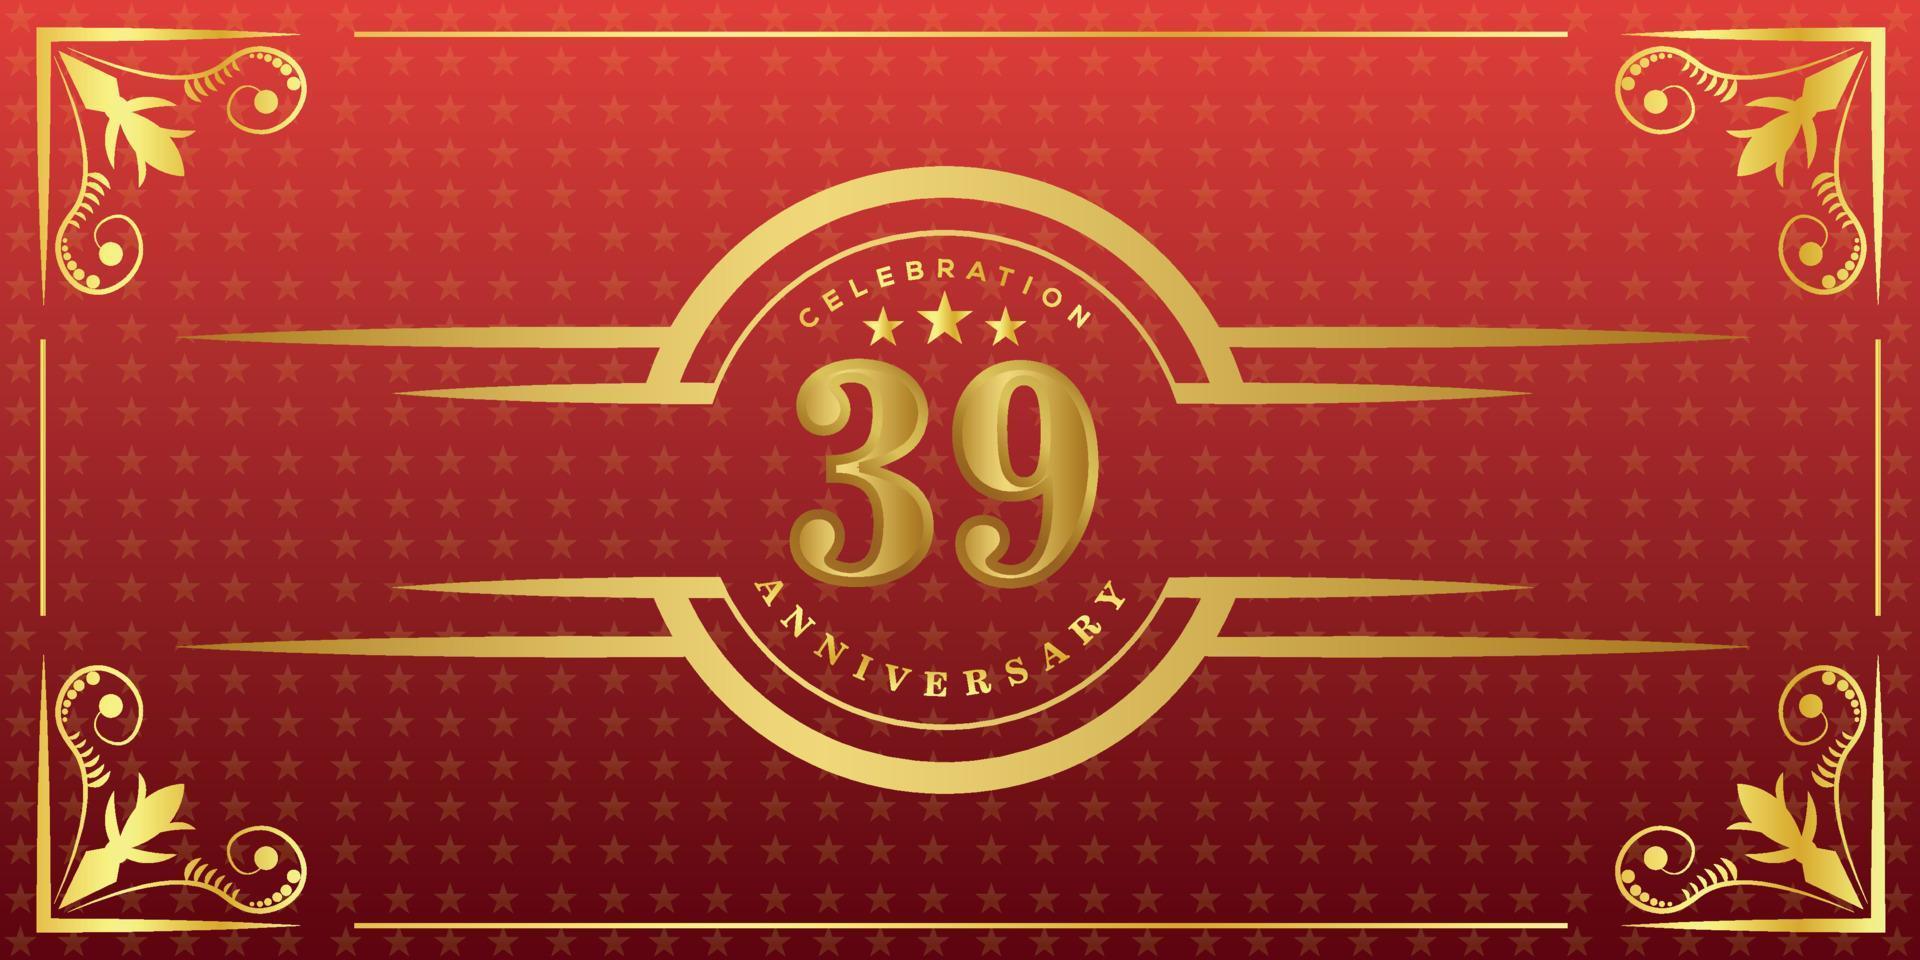 39th anniversary logo with golden ring, confetti and gold border isolated on elegant red background, sparkle, vector design for greeting card and invitation card